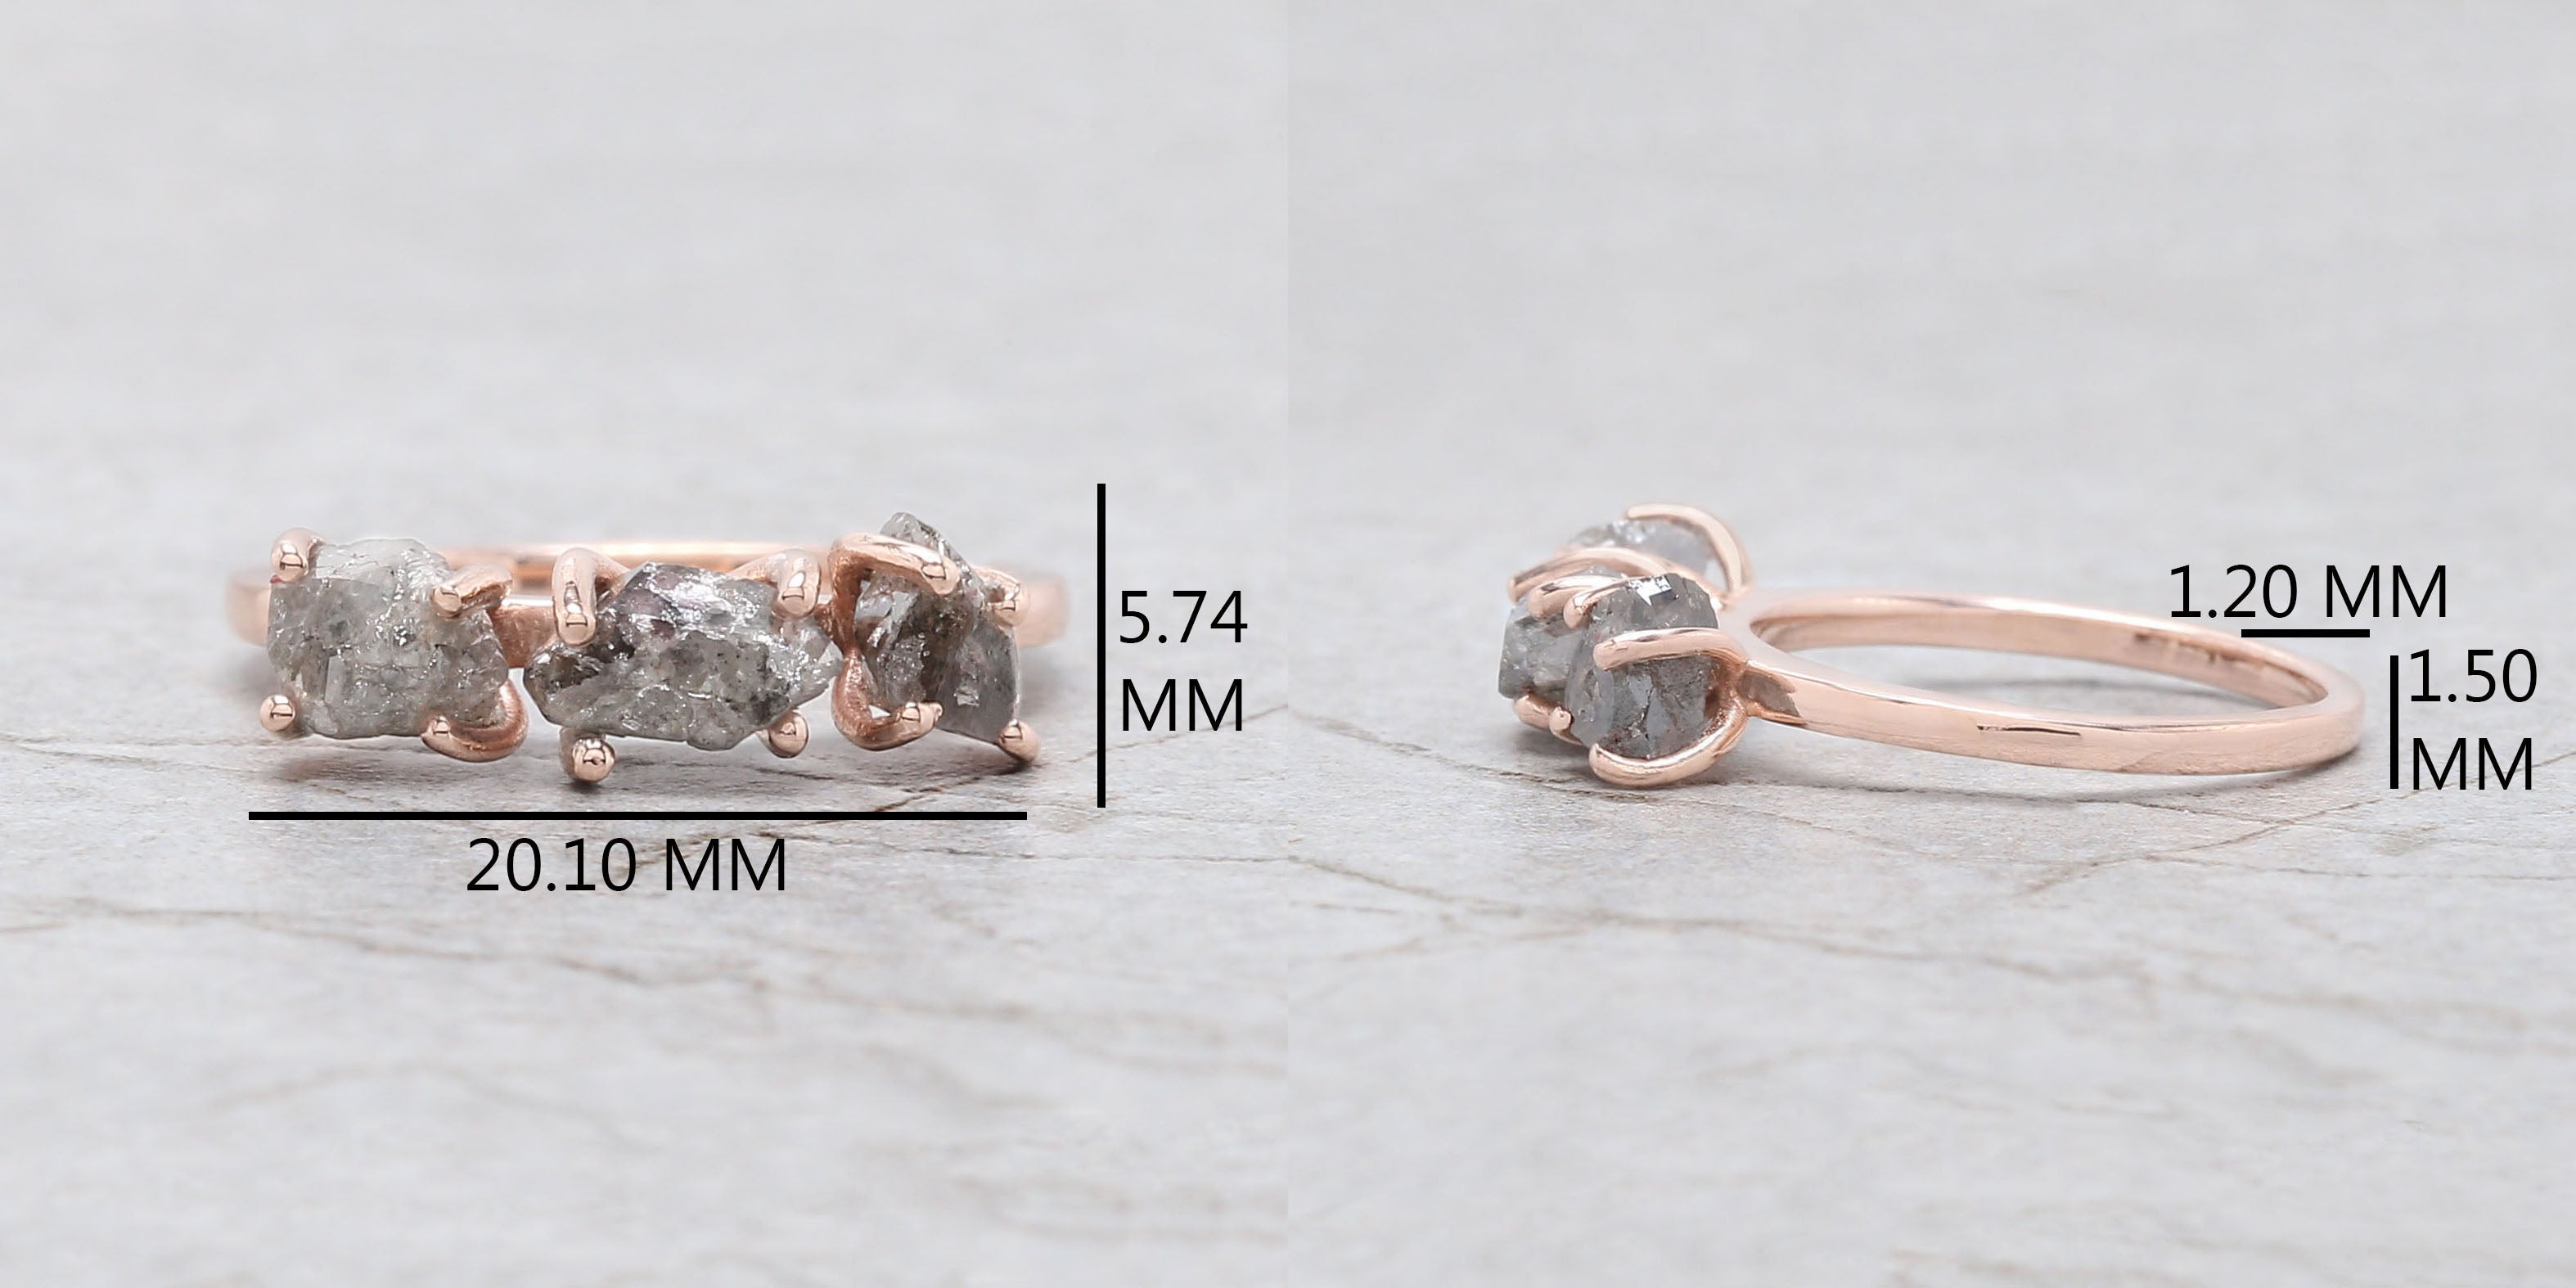 Rough Salt And Pepper Diamond Ring 2.46 Ct 6.97 MM Rough Shape Diamond Ring 14K Solid Rose Gold Silver Engagement Ring Gift For Her QL1957